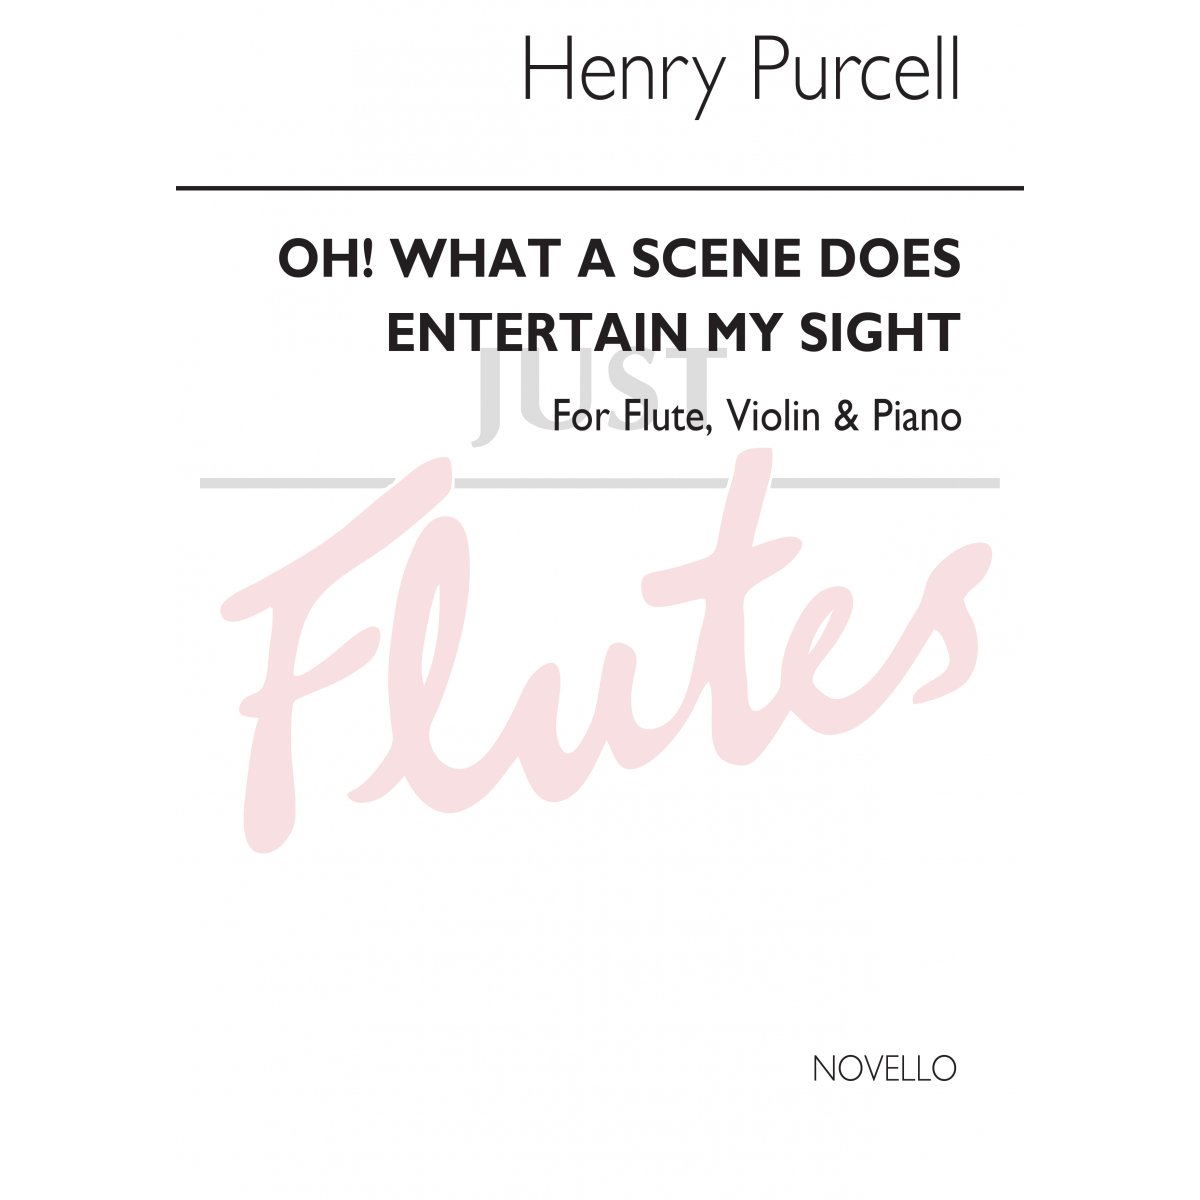 Oh What A Scene Does Entertain My Sight [Flute, Violin, Piano]